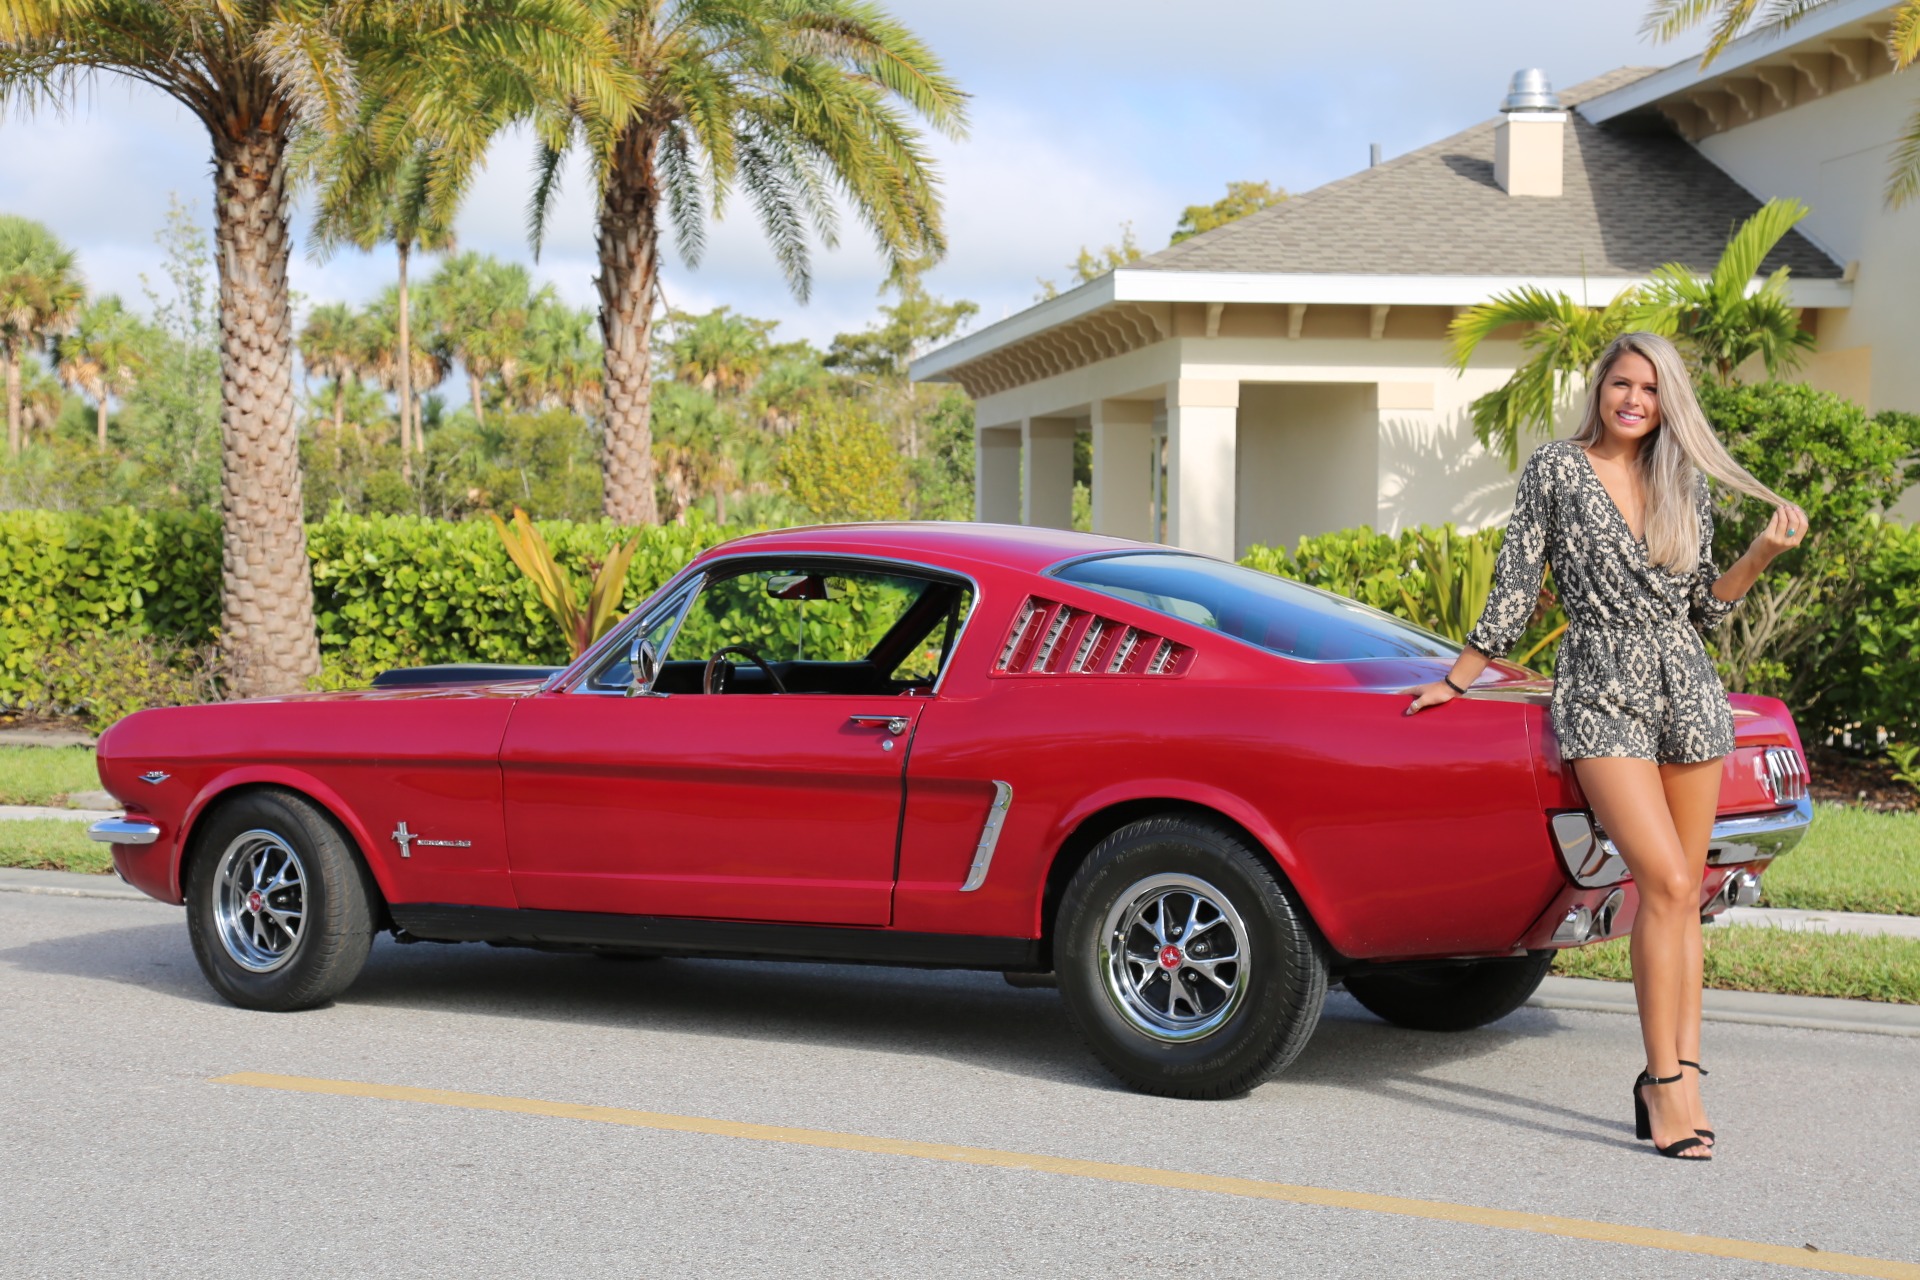 Used 1966 Ford Mustang Fastback 2+2 for sale Sold at Muscle Cars for Sale Inc. in Fort Myers FL 33912 5